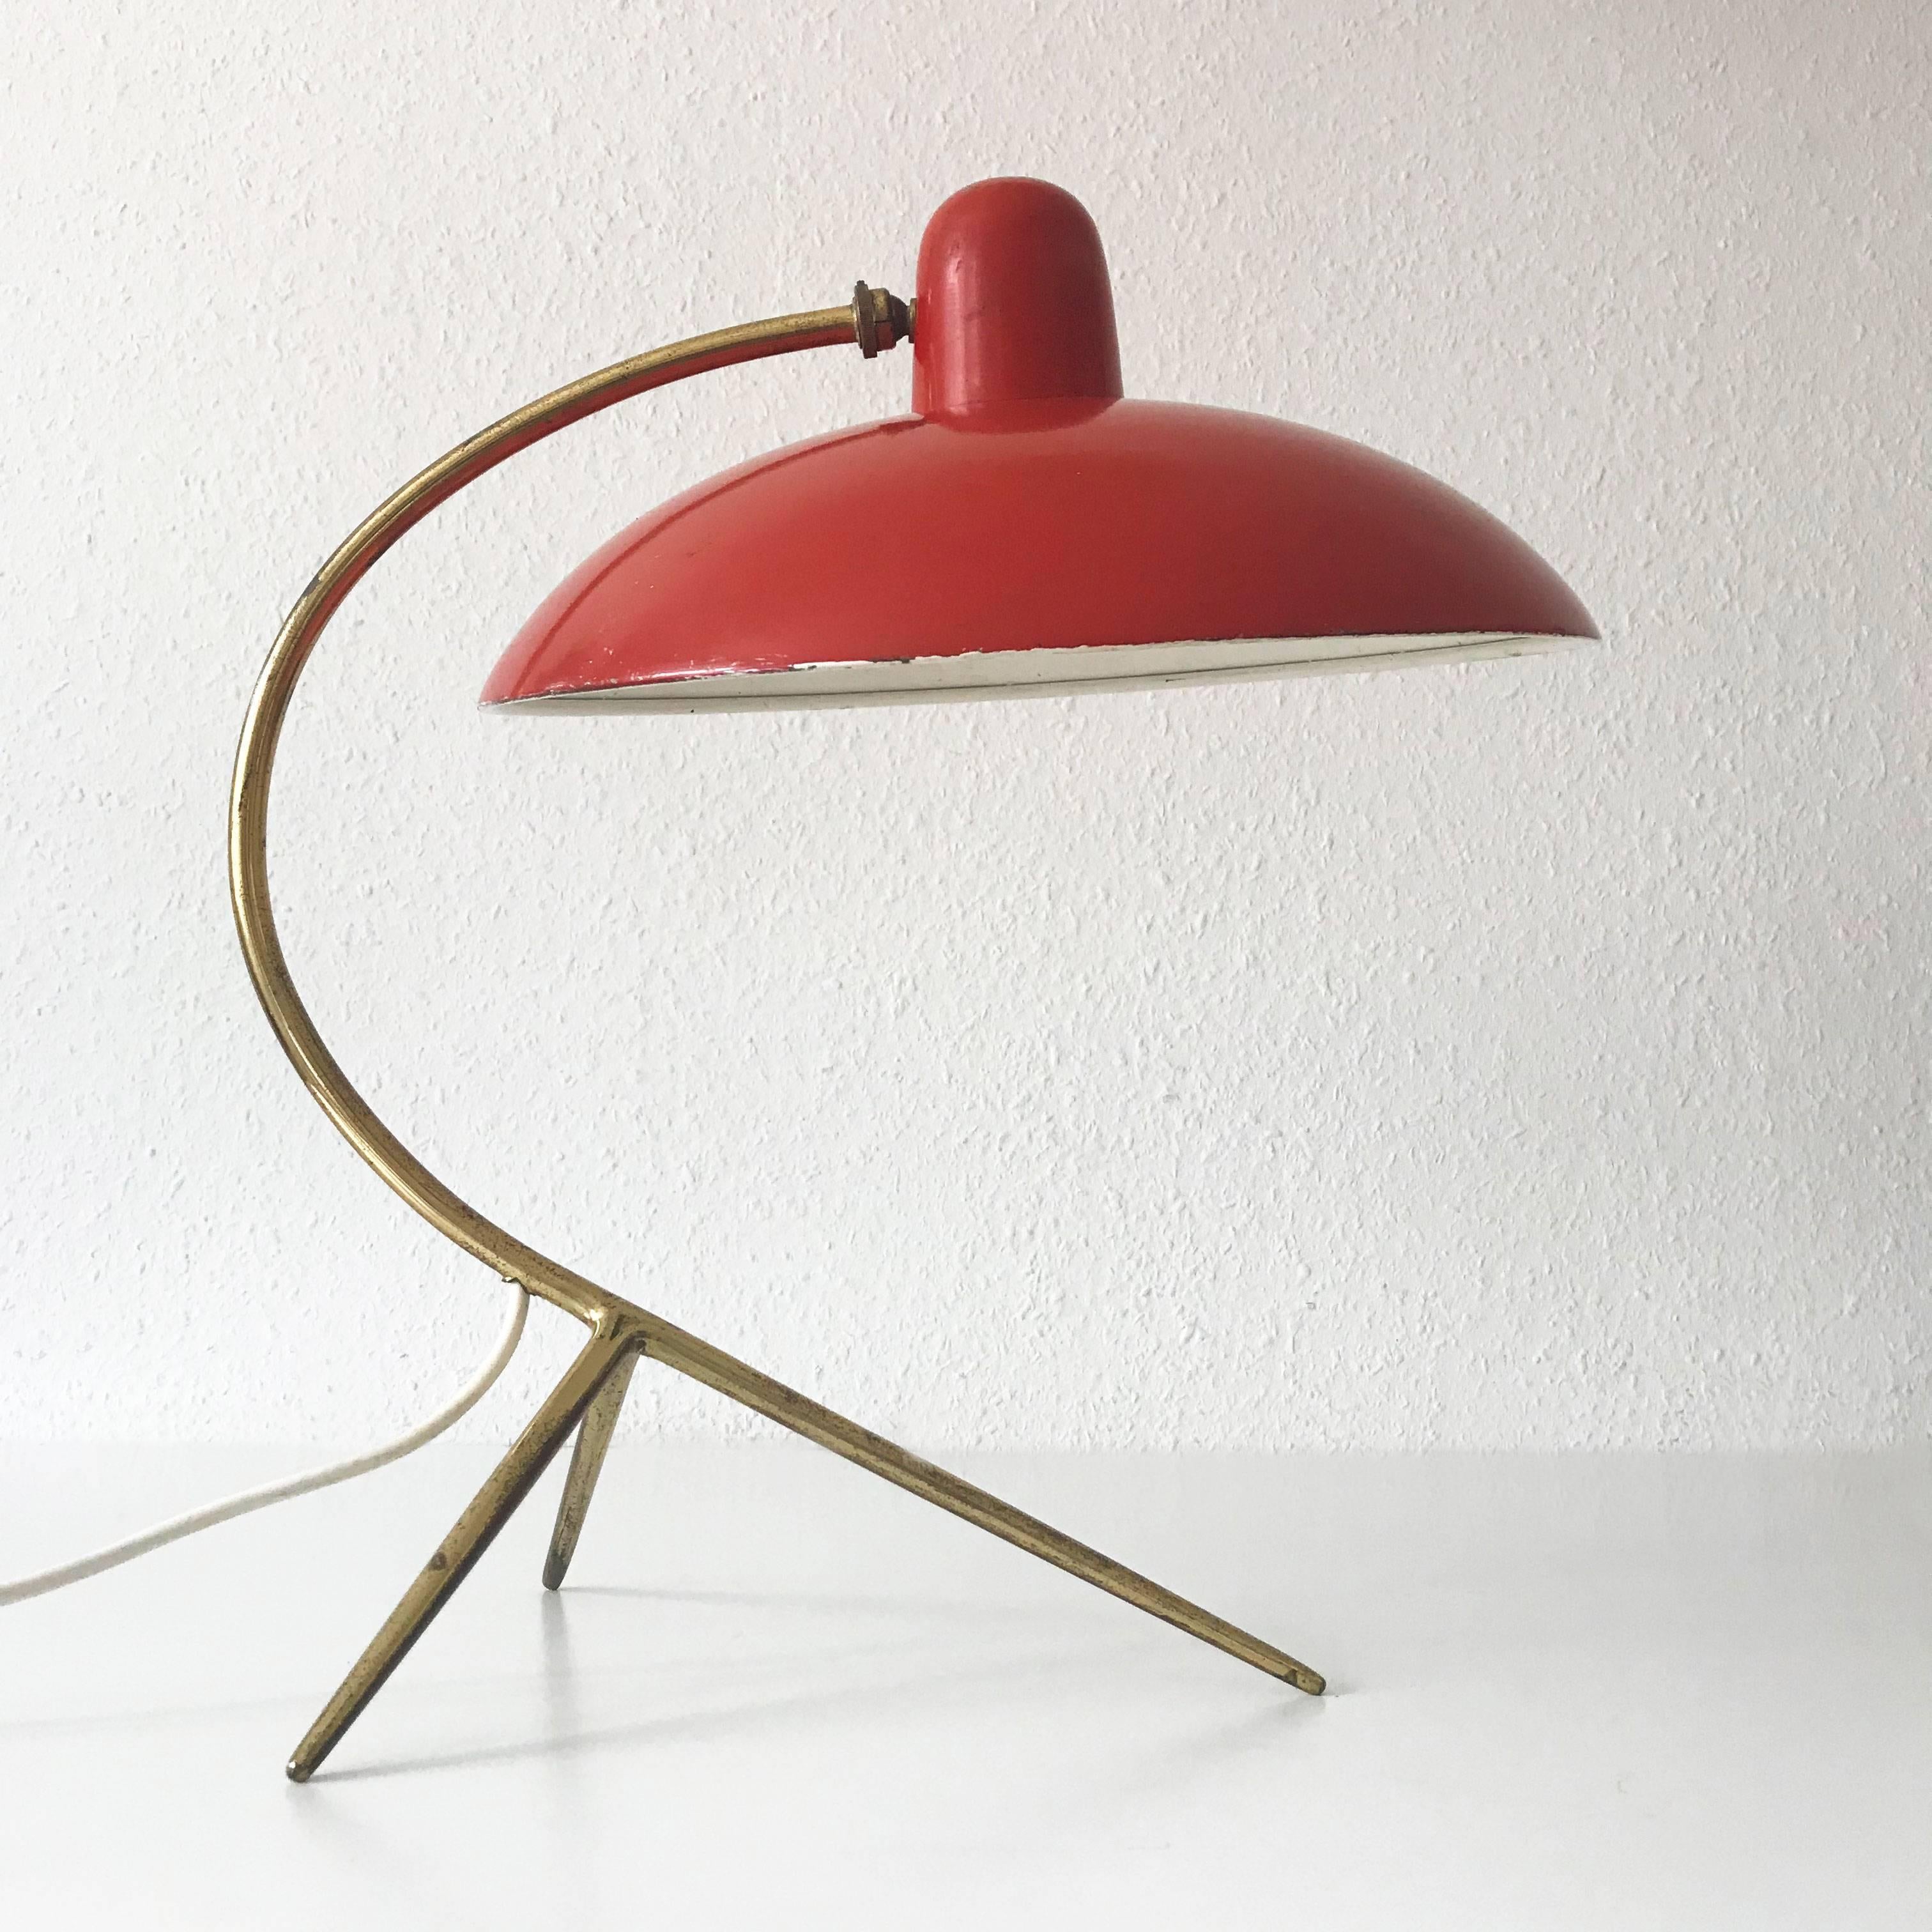 Lacquered Exceptional Italian Mid-Century Modern Table Lamp, 1950s